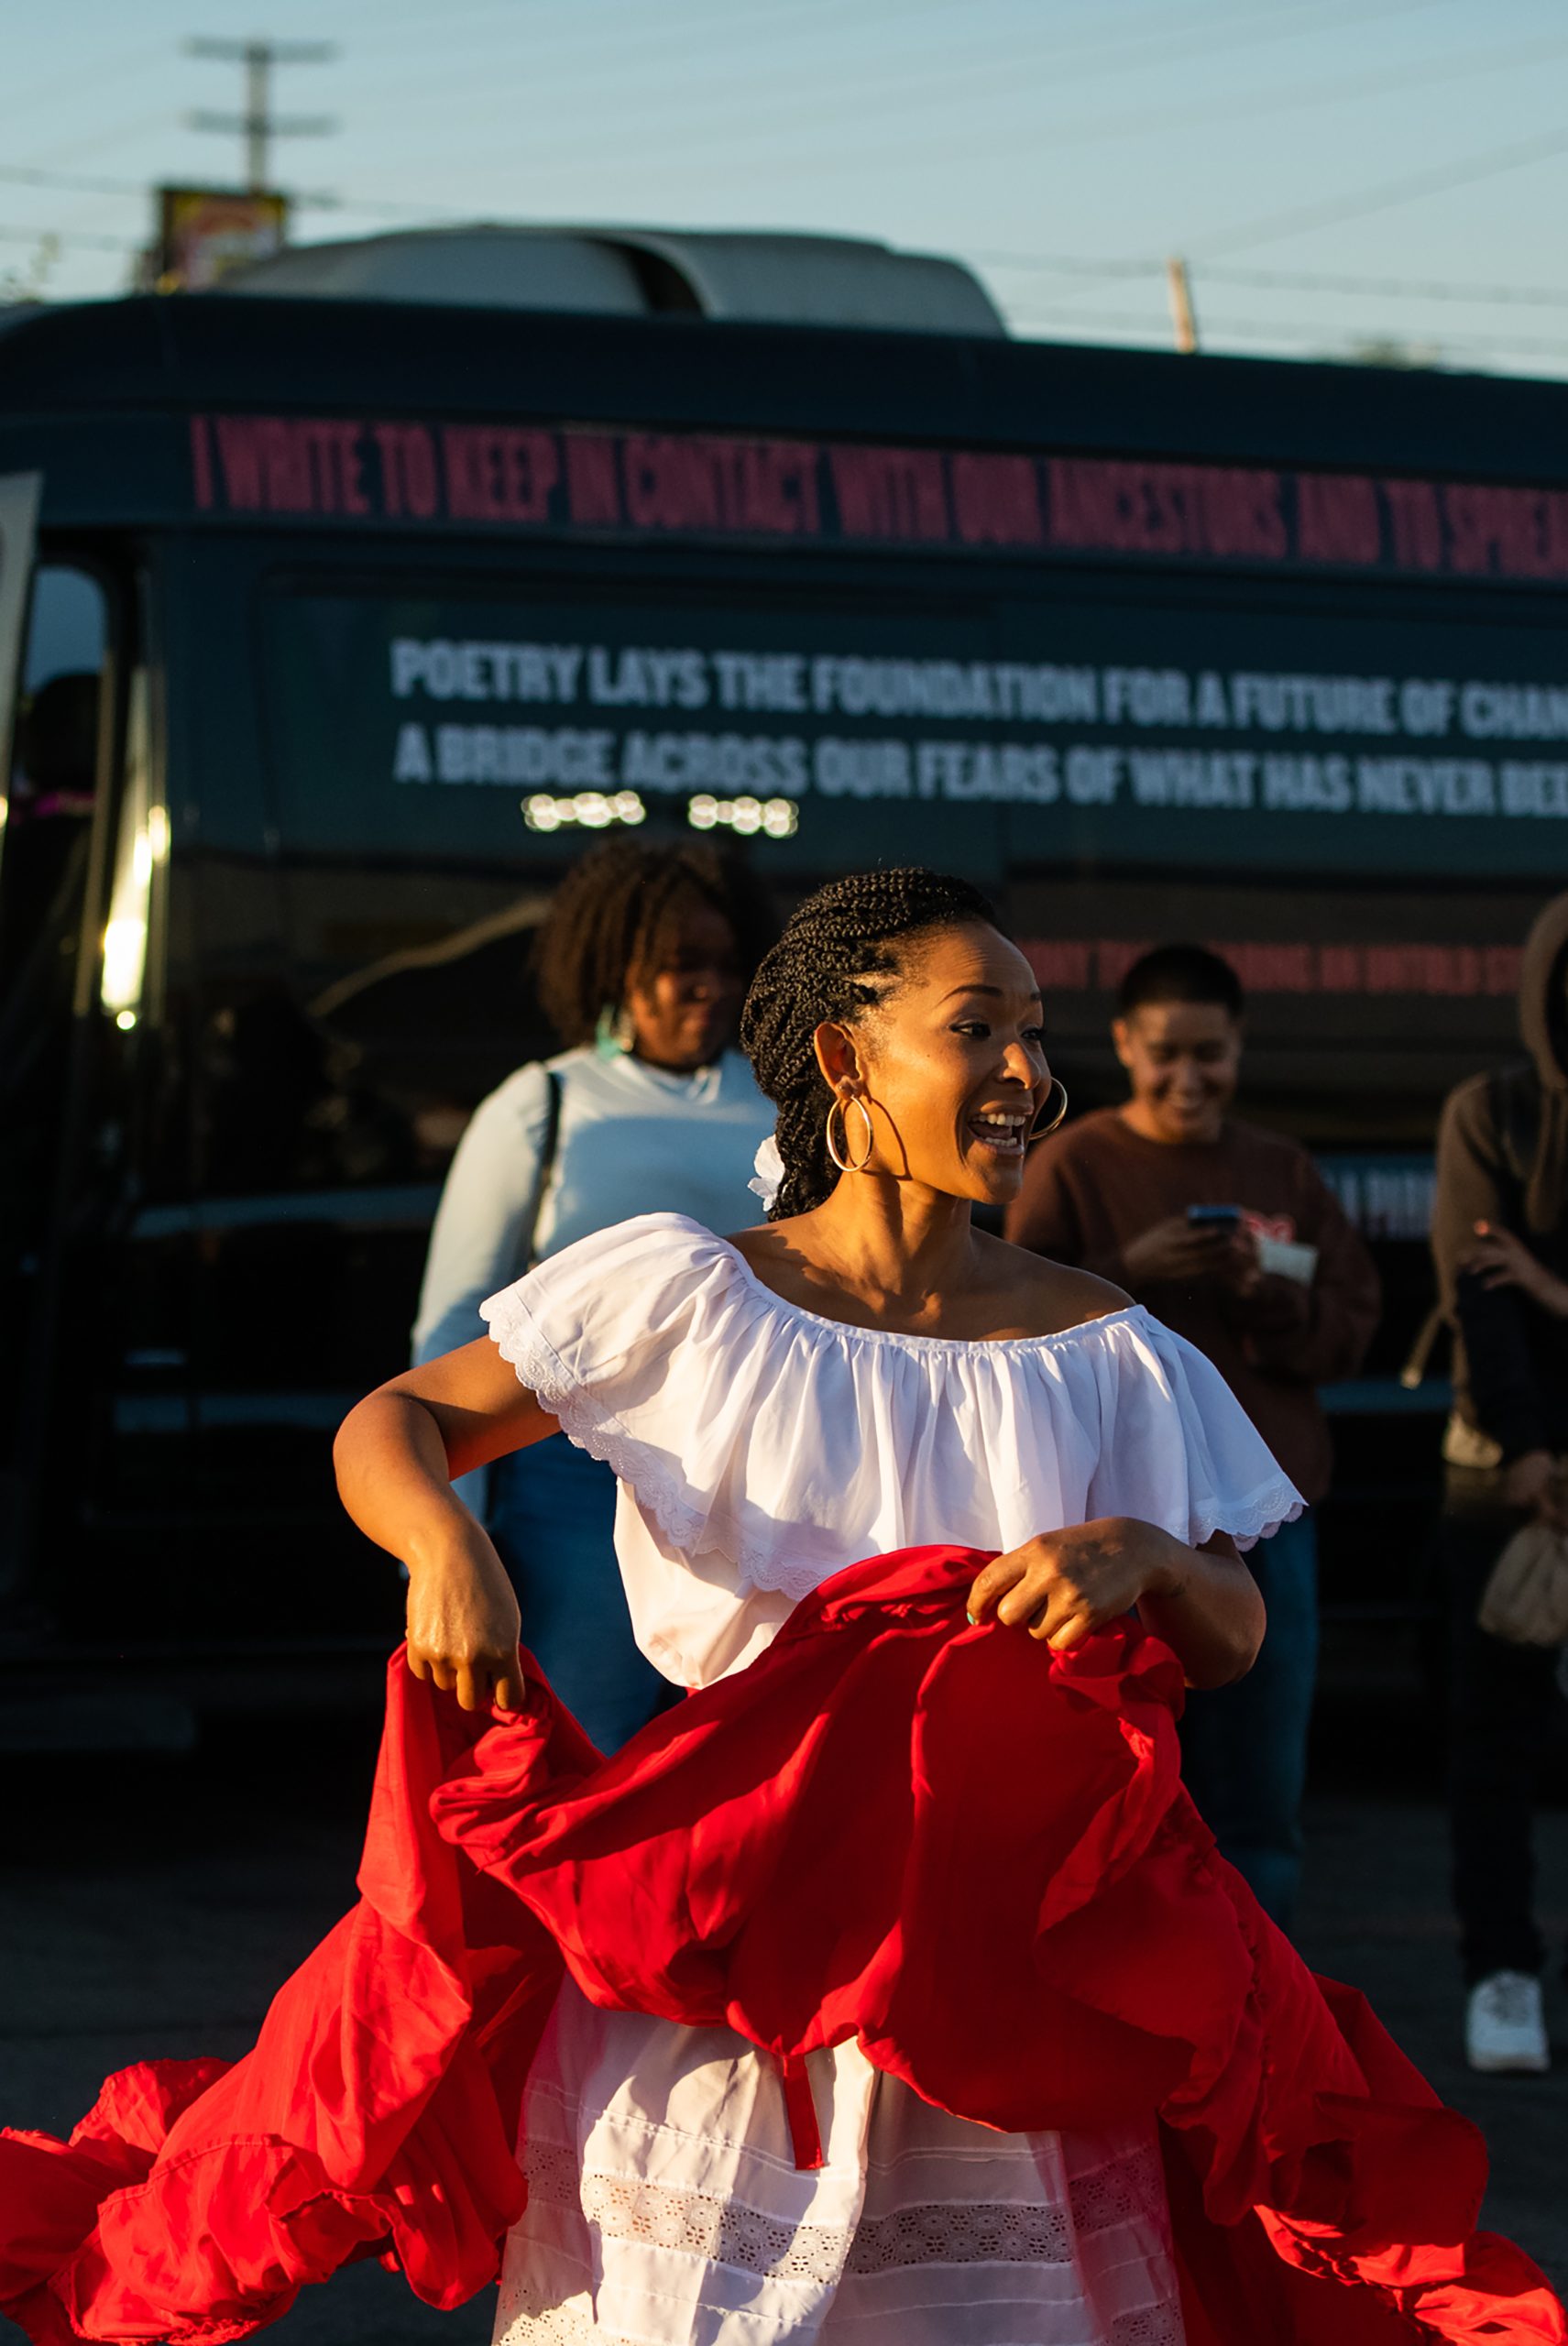 A photograph of Nadia Calmet, a woman of Afro-Peruvian descent wearing a white top and bright red overskirt that she holds up, smiles as she performs a dance for an audience outside.